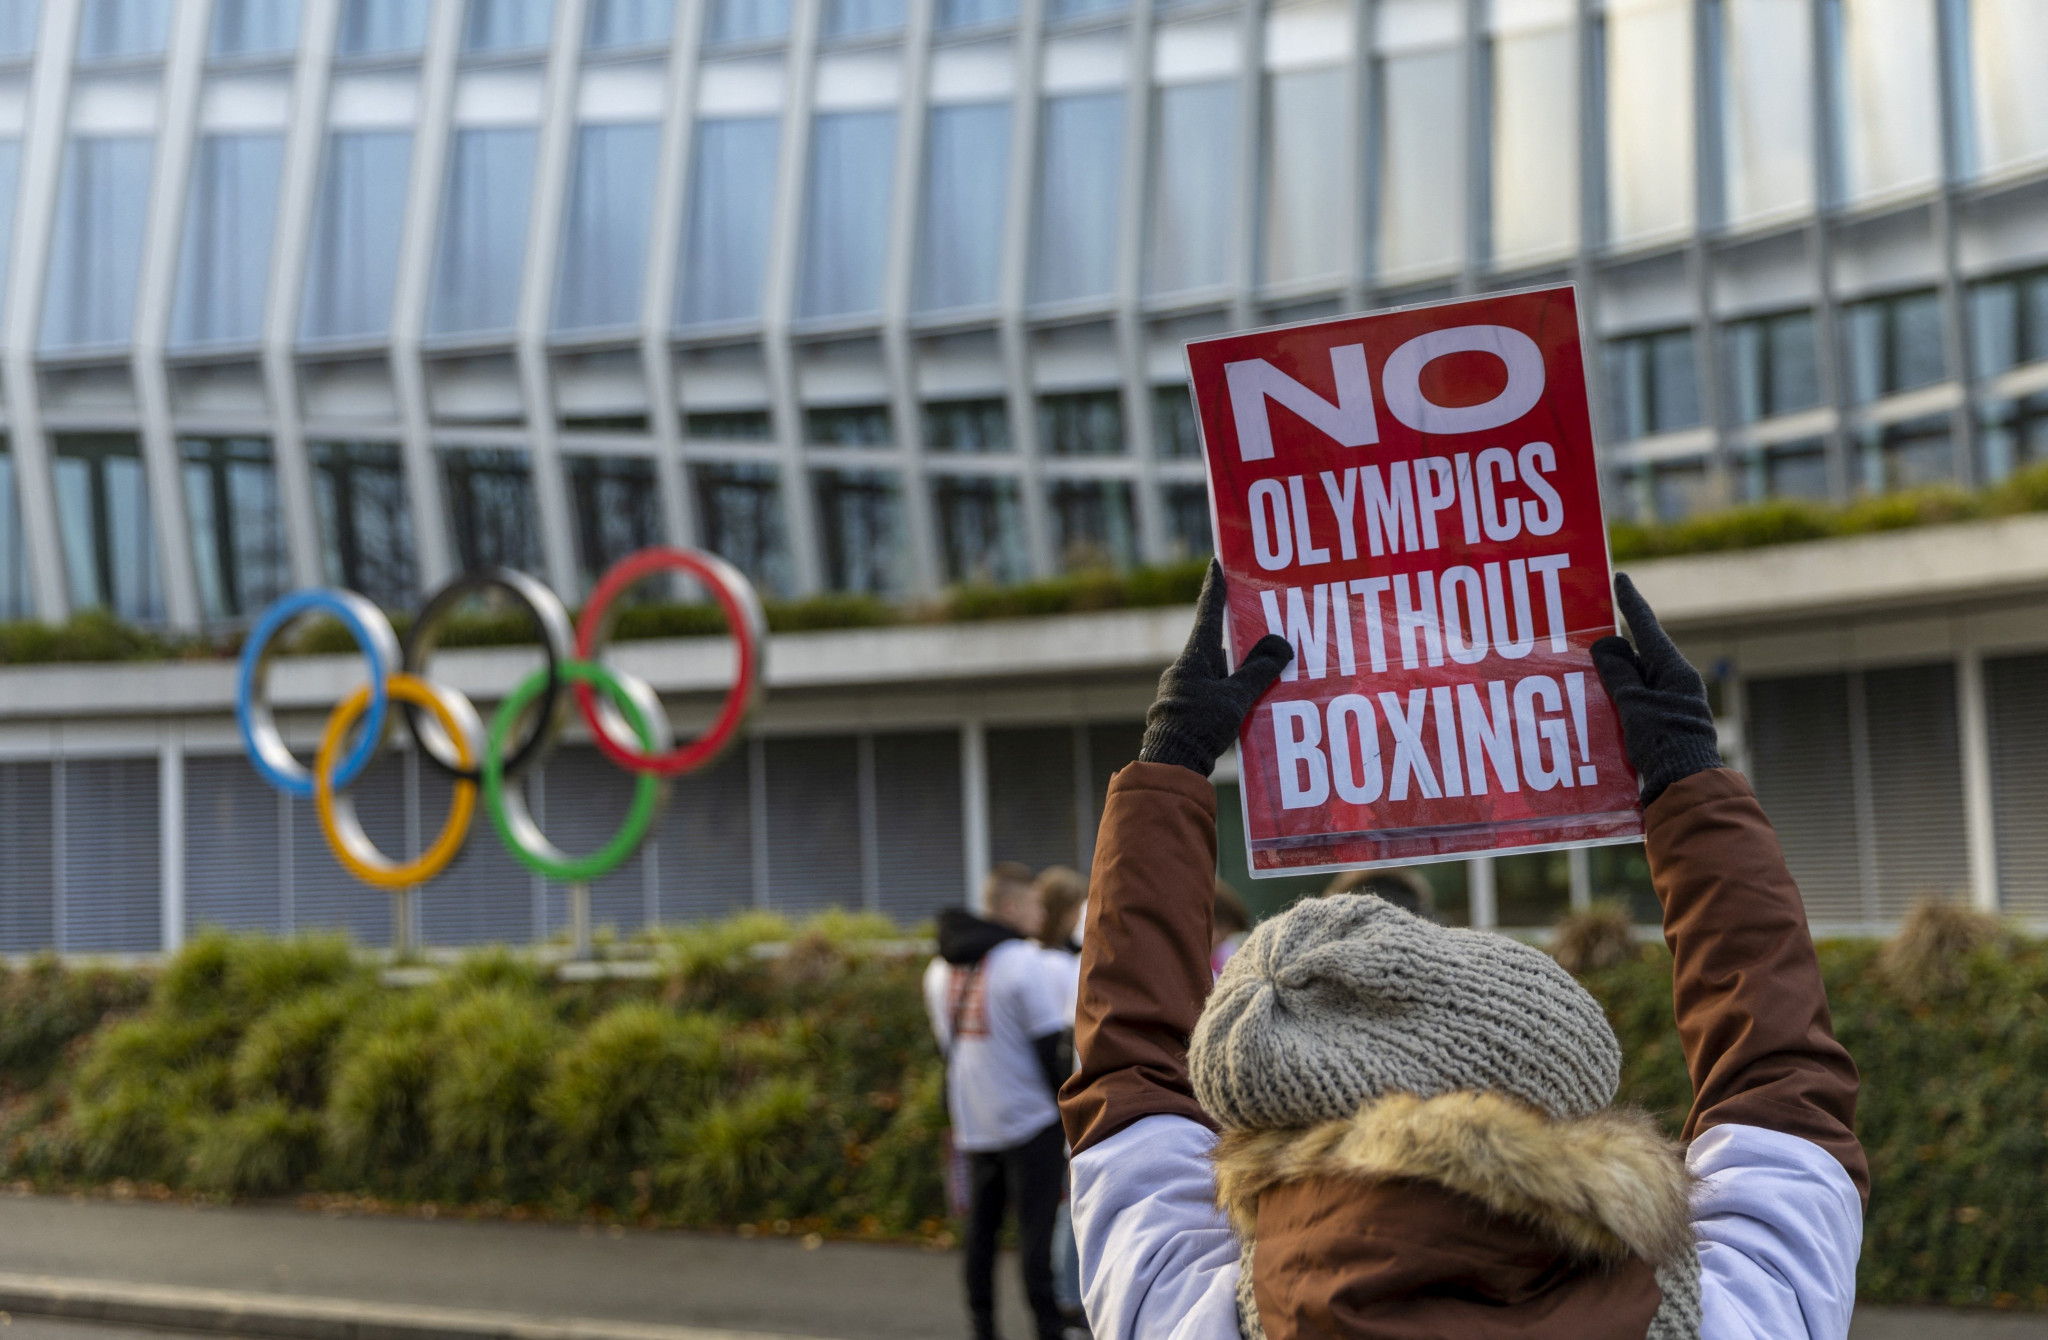 The IBA's hopes of rescuing boxing's place at the Olympic Games from Los Angeles 2028 by itself appear remote ©Getty Images